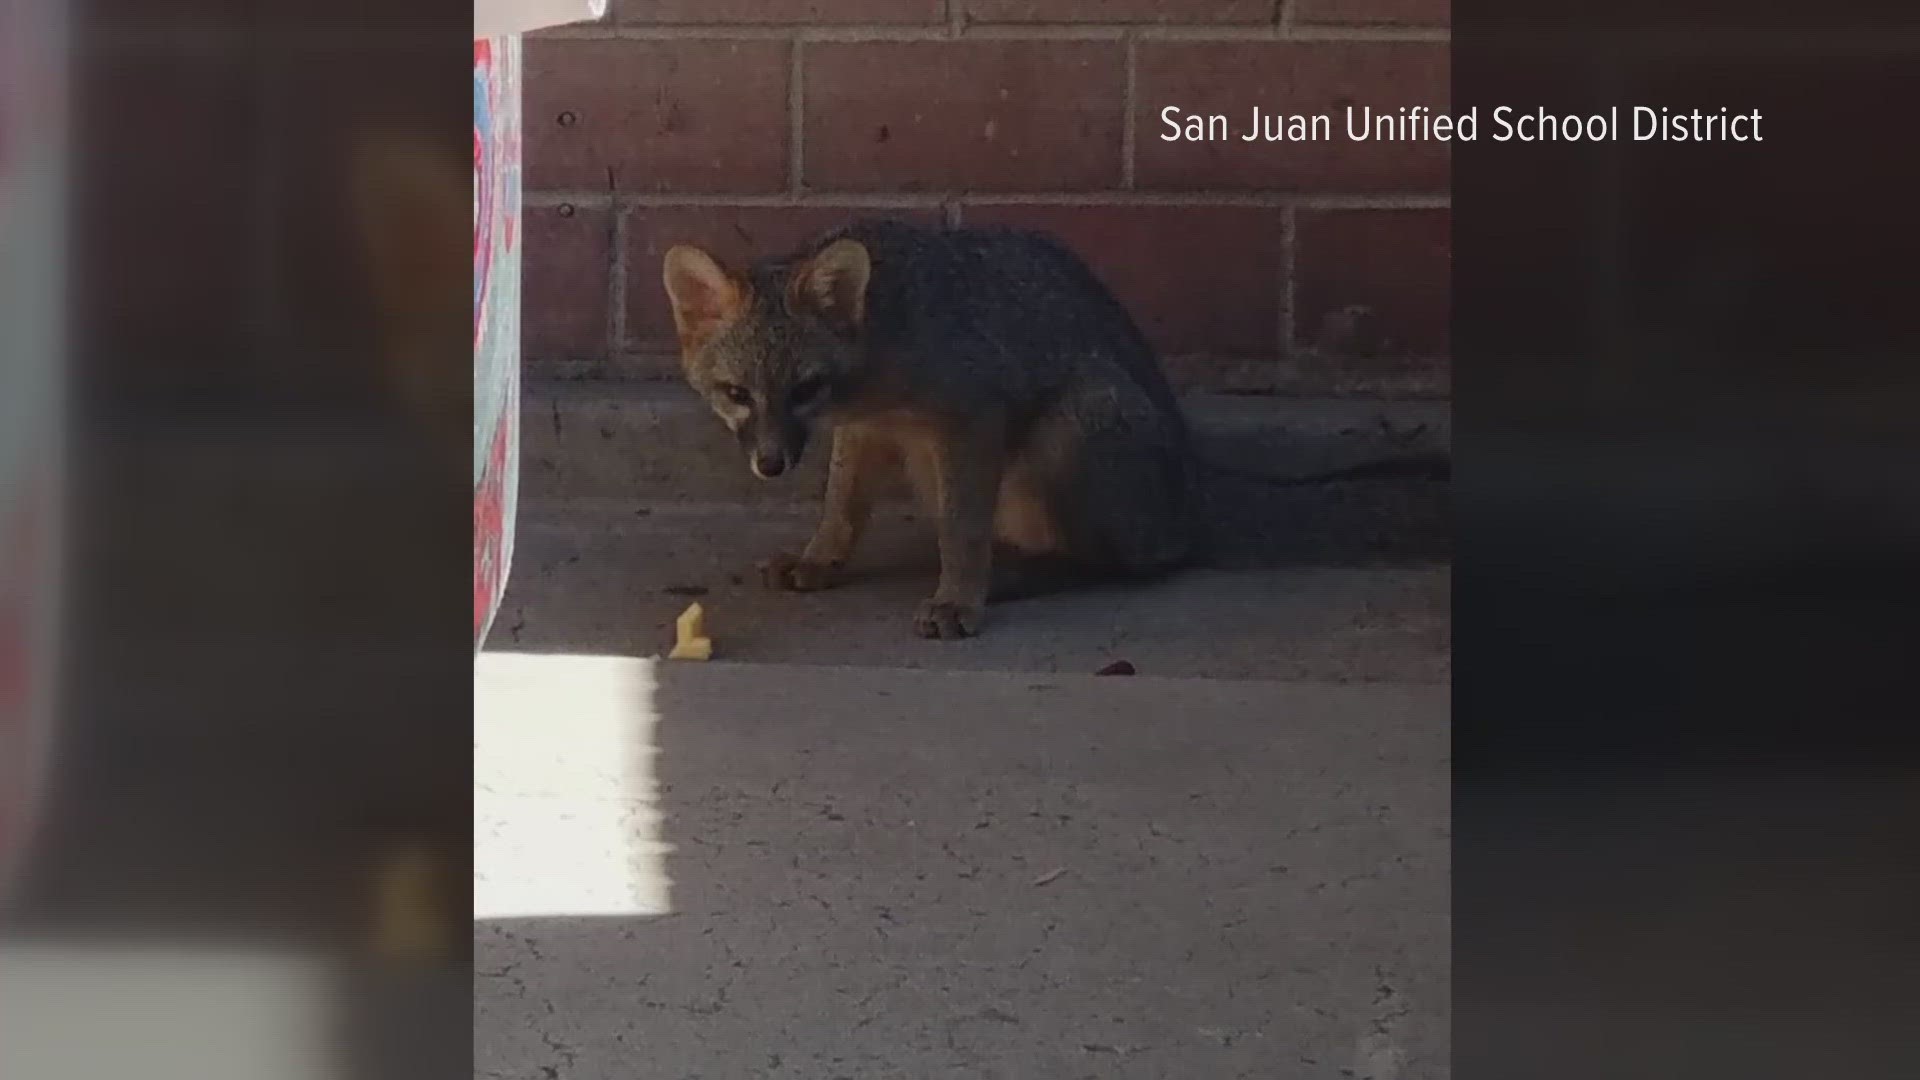 One student's grandmother said the idea of foxes on an elementary school campus is concerning since her grandchild "likes to pet everything."